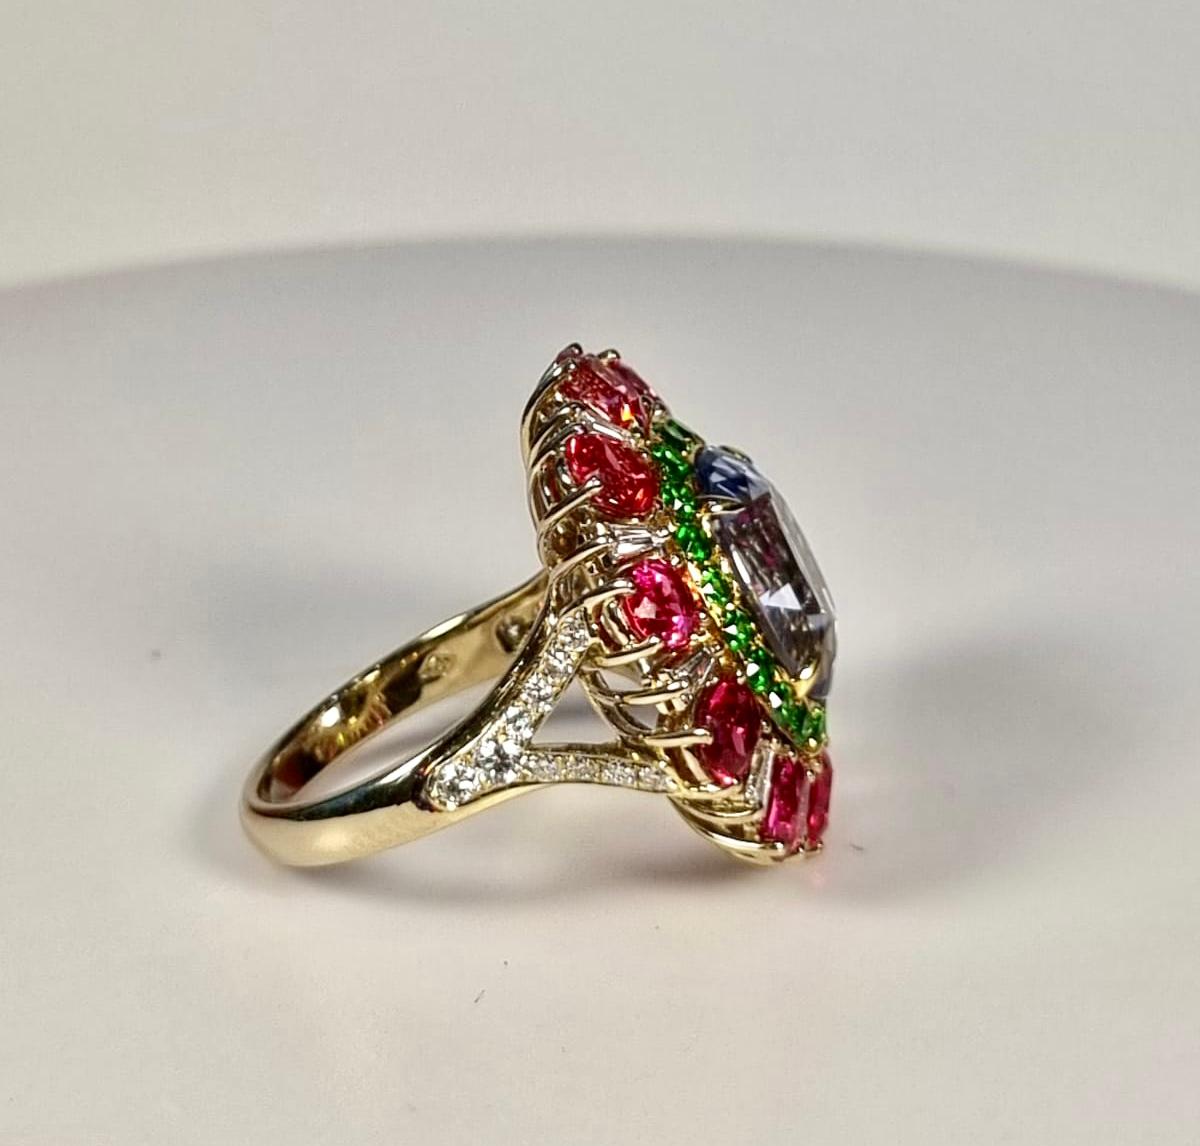 Flower ring with non heated  central Blue Sapphire Garnet and Spinels in 18k gold 
Not Heated central Sapphire  8.27 cts
20 green garnets  0.76 cts
10 pink spinels  4.46 cts
20 round diamonds  0.64 cts
Ring weight 10.88gr
Ring size Europe 55
Ring